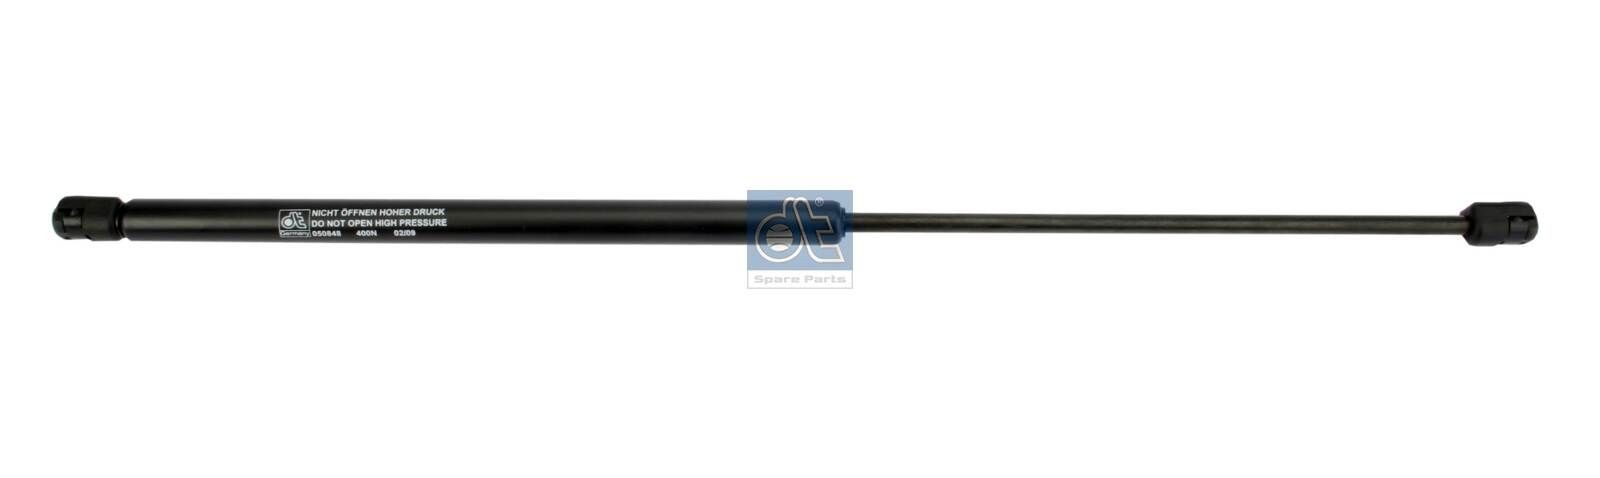 Boot gas struts DT Spare Parts 400N, 585 mm - 1.23258